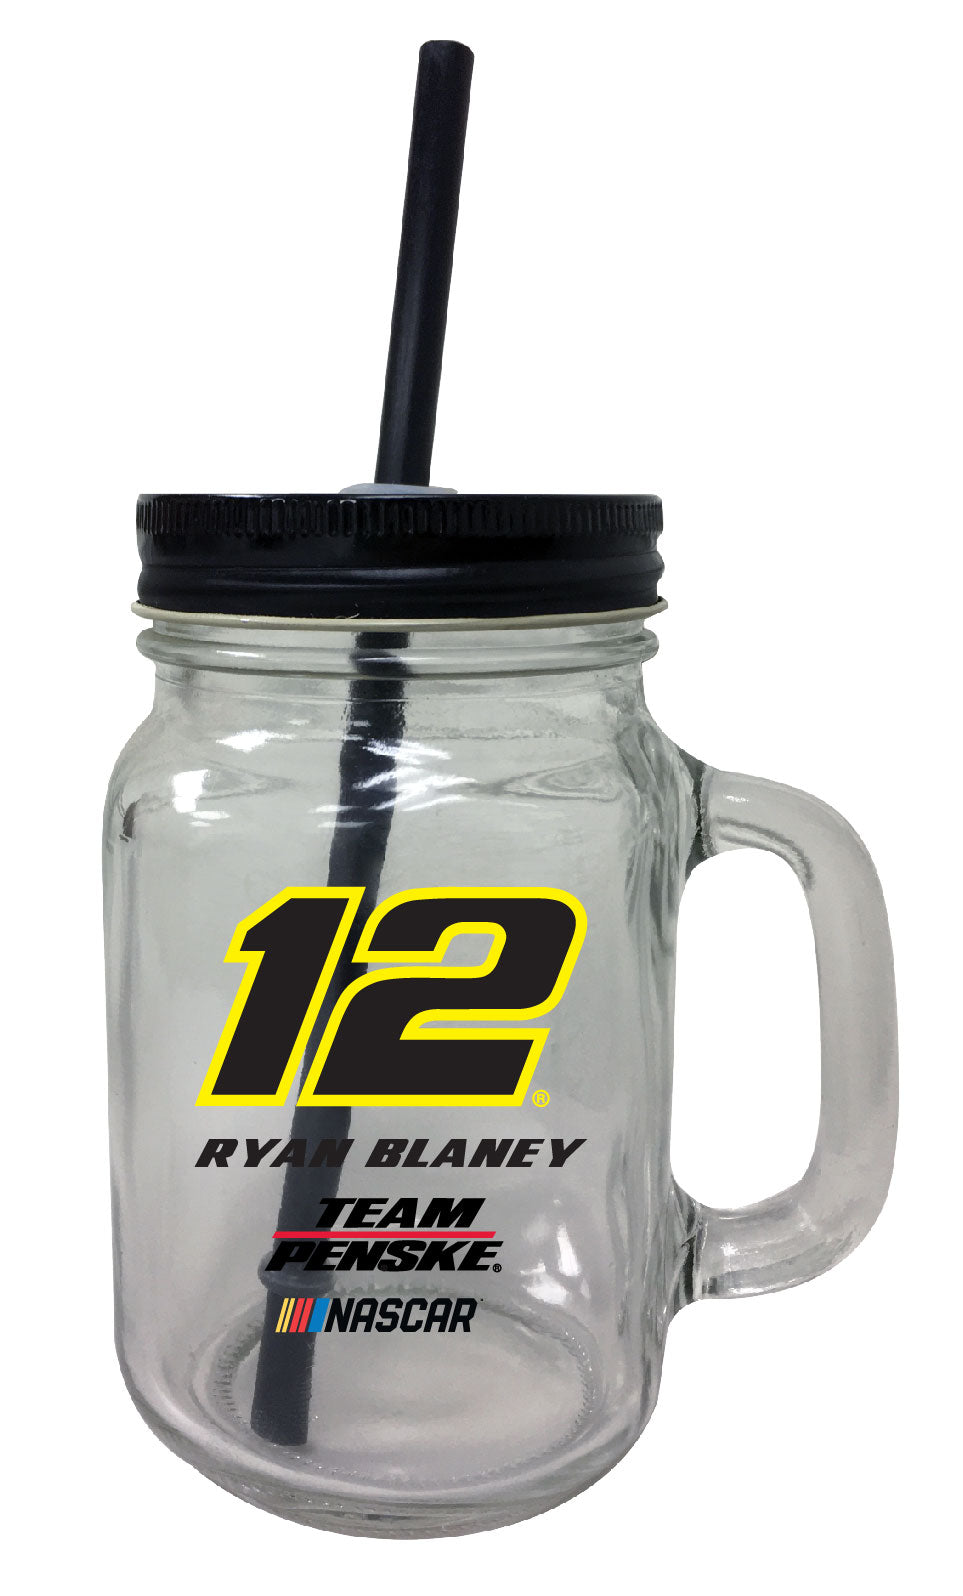 R and R Imports Officially Licensed NASCAR Ryan Blaney #12 Jar Tumbler New for 2020